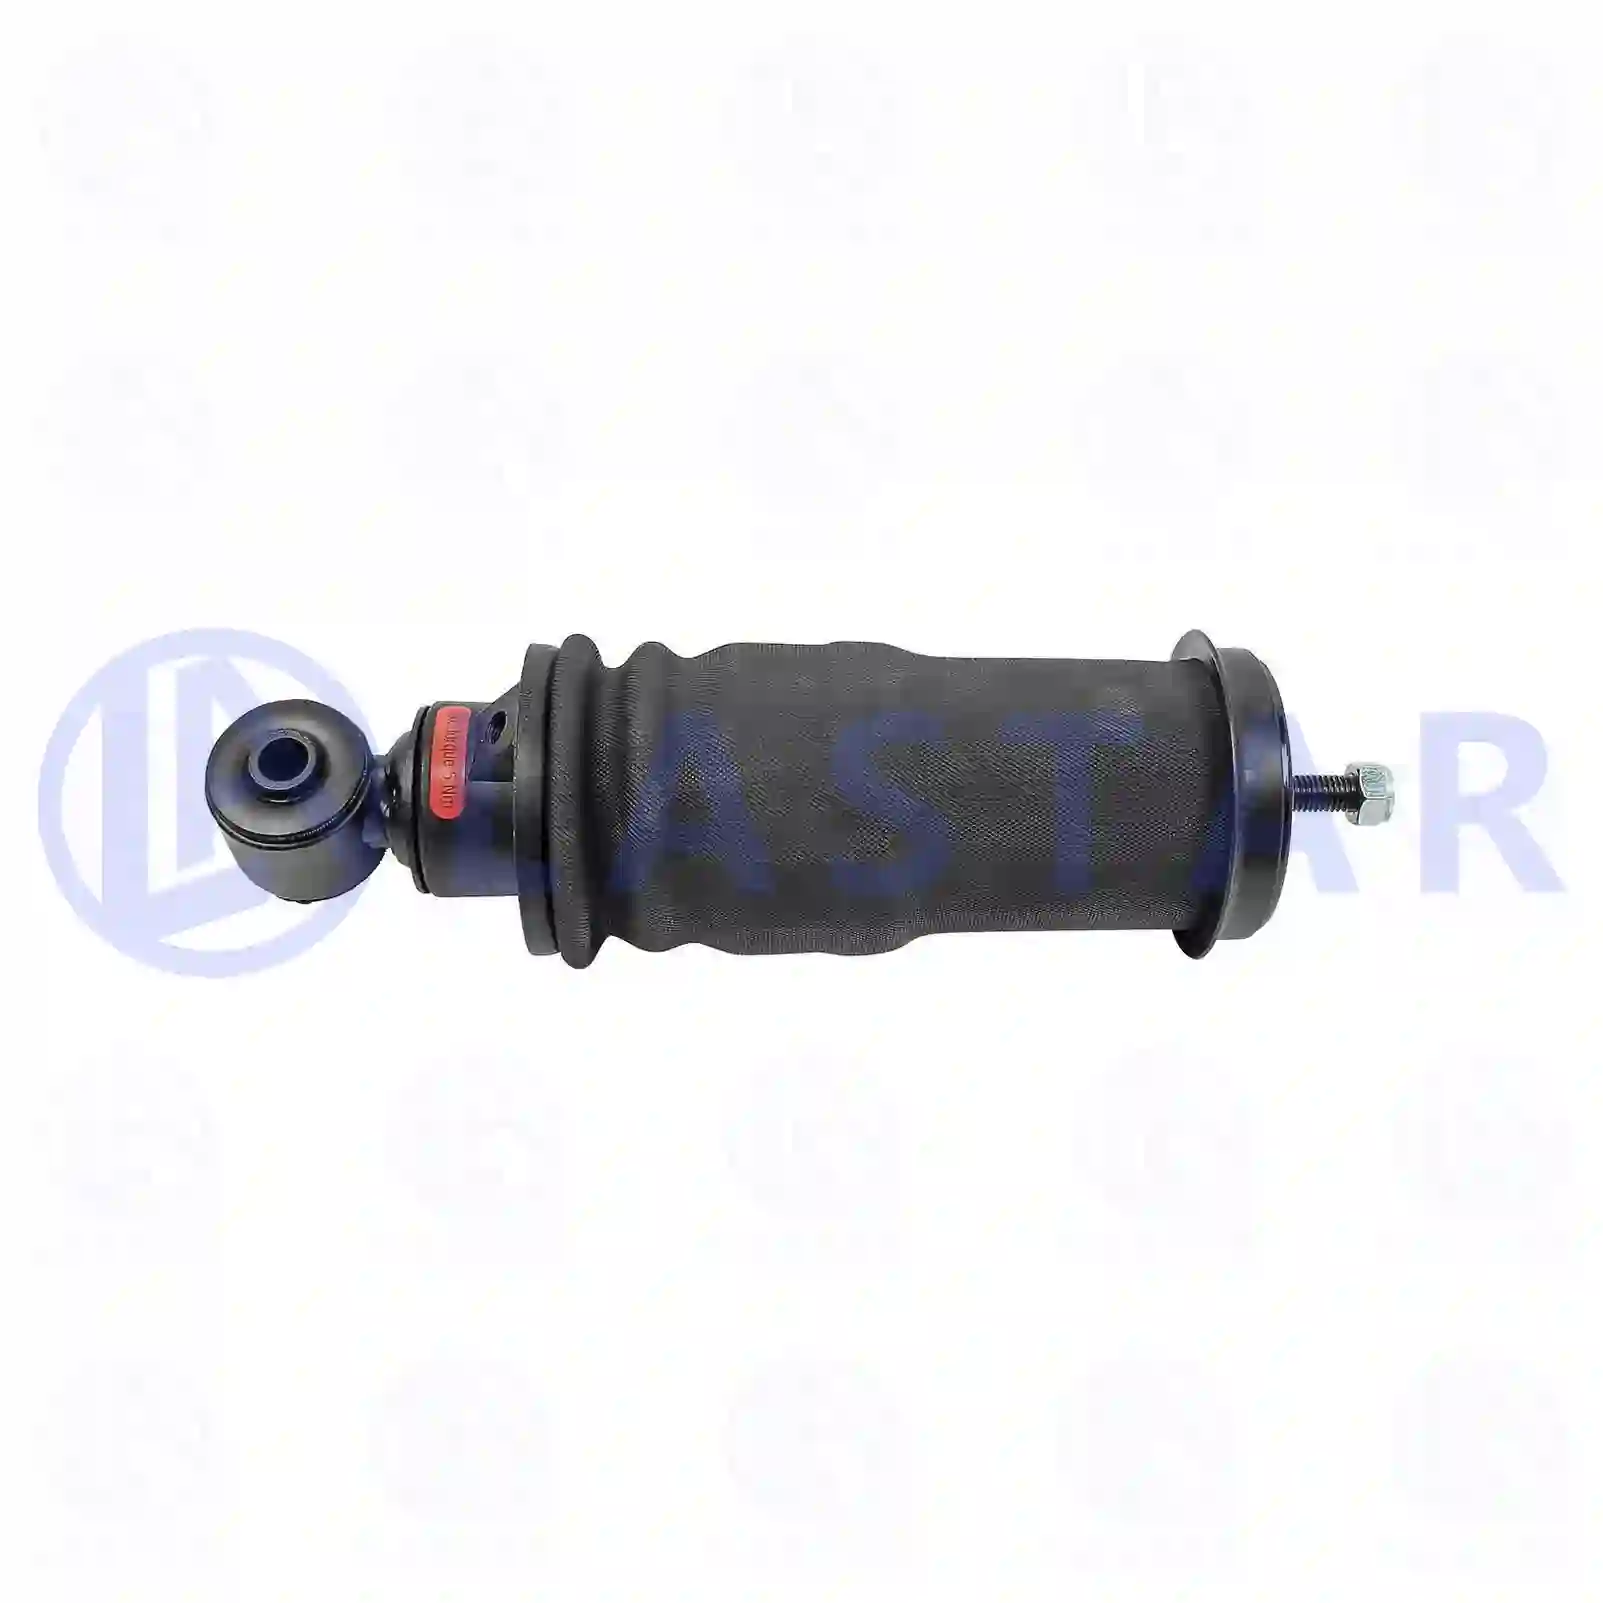 Cabin shock absorber, with air bellow, 77735335, 1870893, 2493170, , , , ||  77735335 Lastar Spare Part | Truck Spare Parts, Auotomotive Spare Parts Cabin shock absorber, with air bellow, 77735335, 1870893, 2493170, , , , ||  77735335 Lastar Spare Part | Truck Spare Parts, Auotomotive Spare Parts